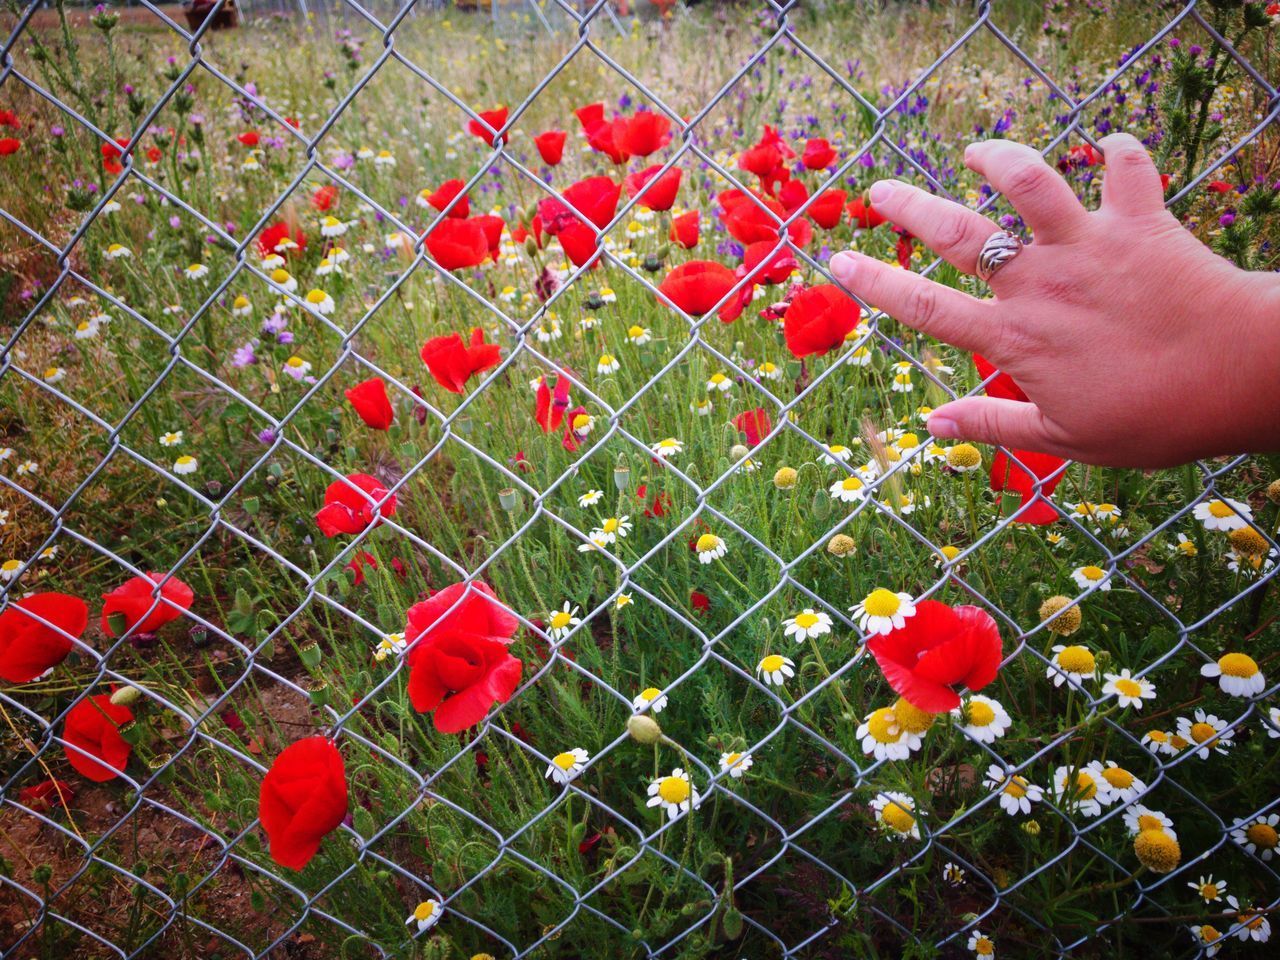 CLOSE-UP OF HAND HOLDING RED POPPIES